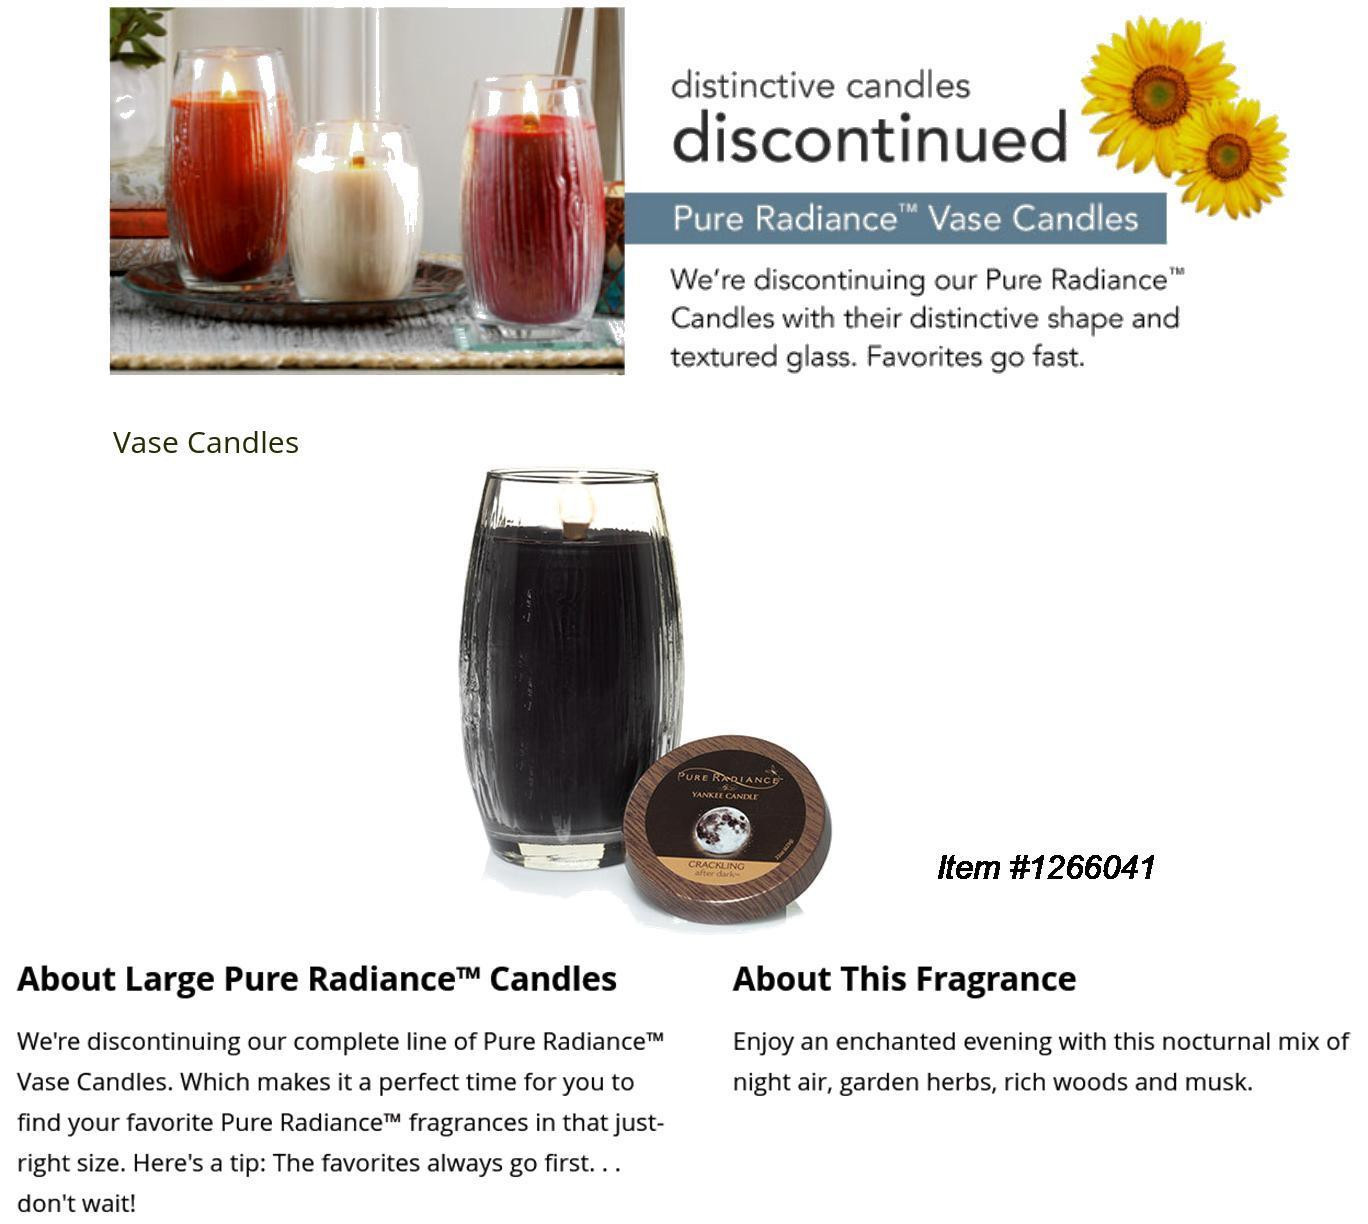 19 attractive Yankee Candle Vase 2024 free download yankee candle vase of yankee candle pure radiance after dark lrg 22 vase retired sold in 1 of 3free shipping yankee candle pure radiance after dark lrg 22 vase retired sold out 2 of 3 yankee